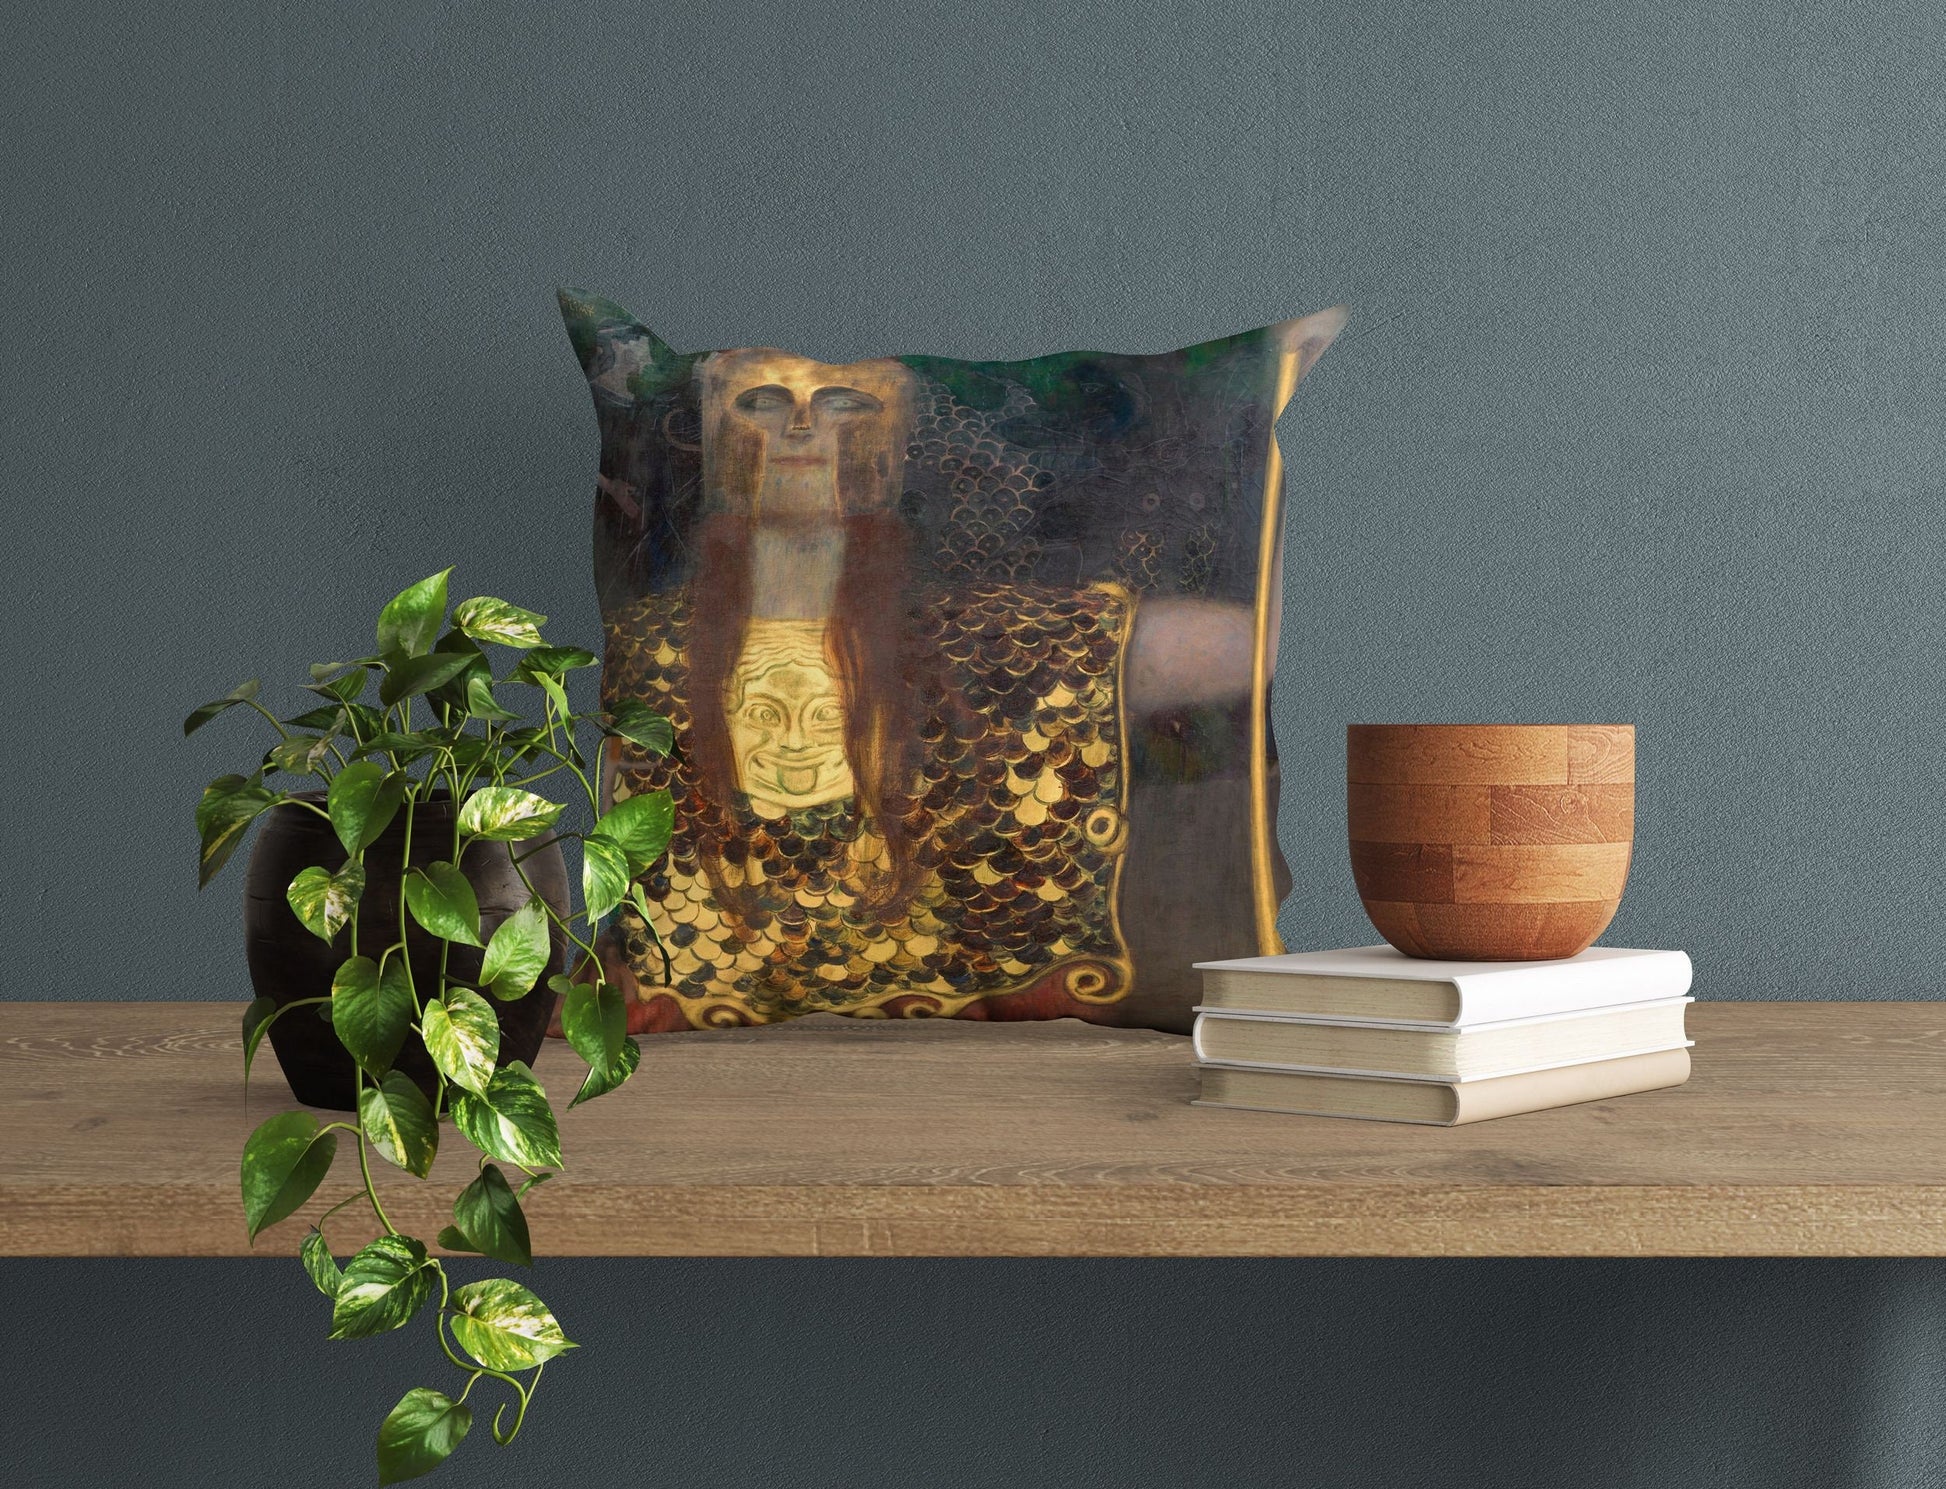 Gustav Klimt Famous Painting Pallas Athene, Decorative Pillow, Abstract Throw Pillow Cover, Art Pillow, Contemporary Pillow, Square Pillow